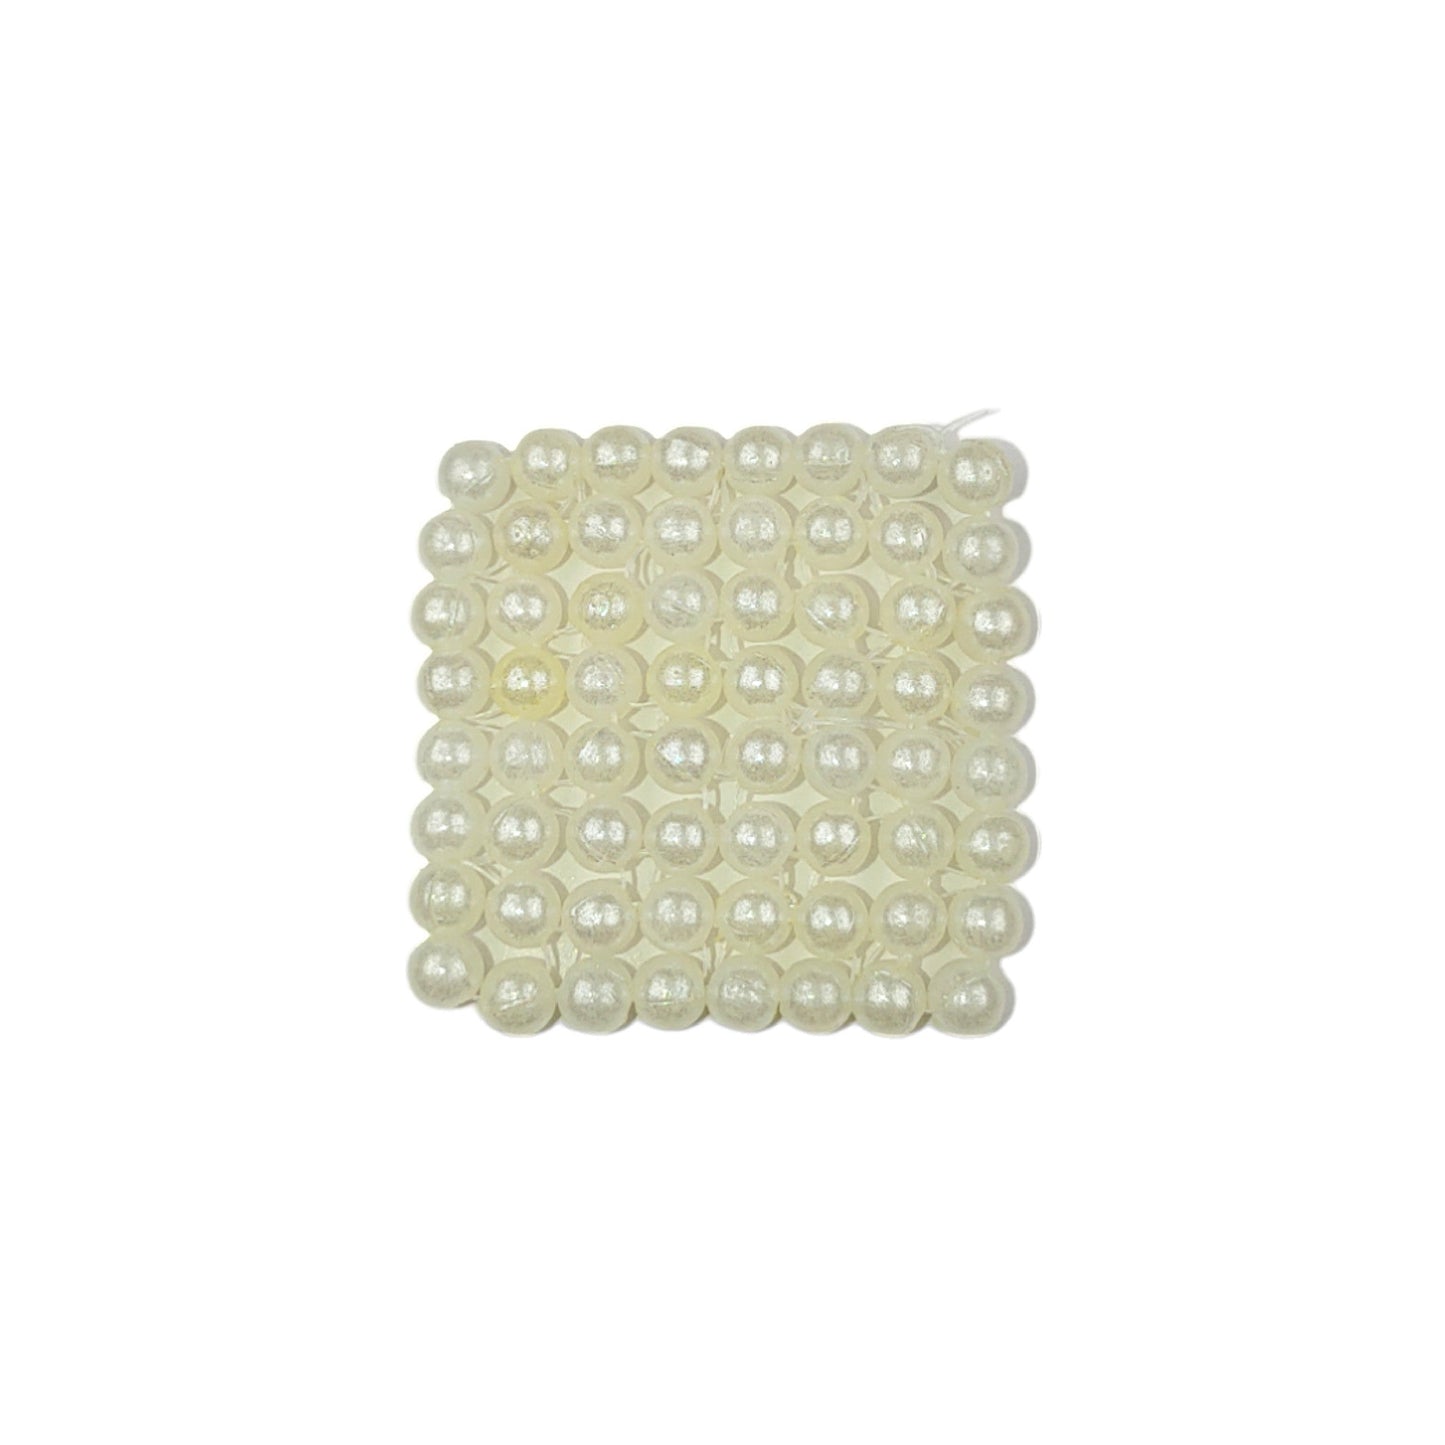 12x12 Pearl White Beaded Square Chatai Motif for Jewelry, Craft or Decoration - 11469